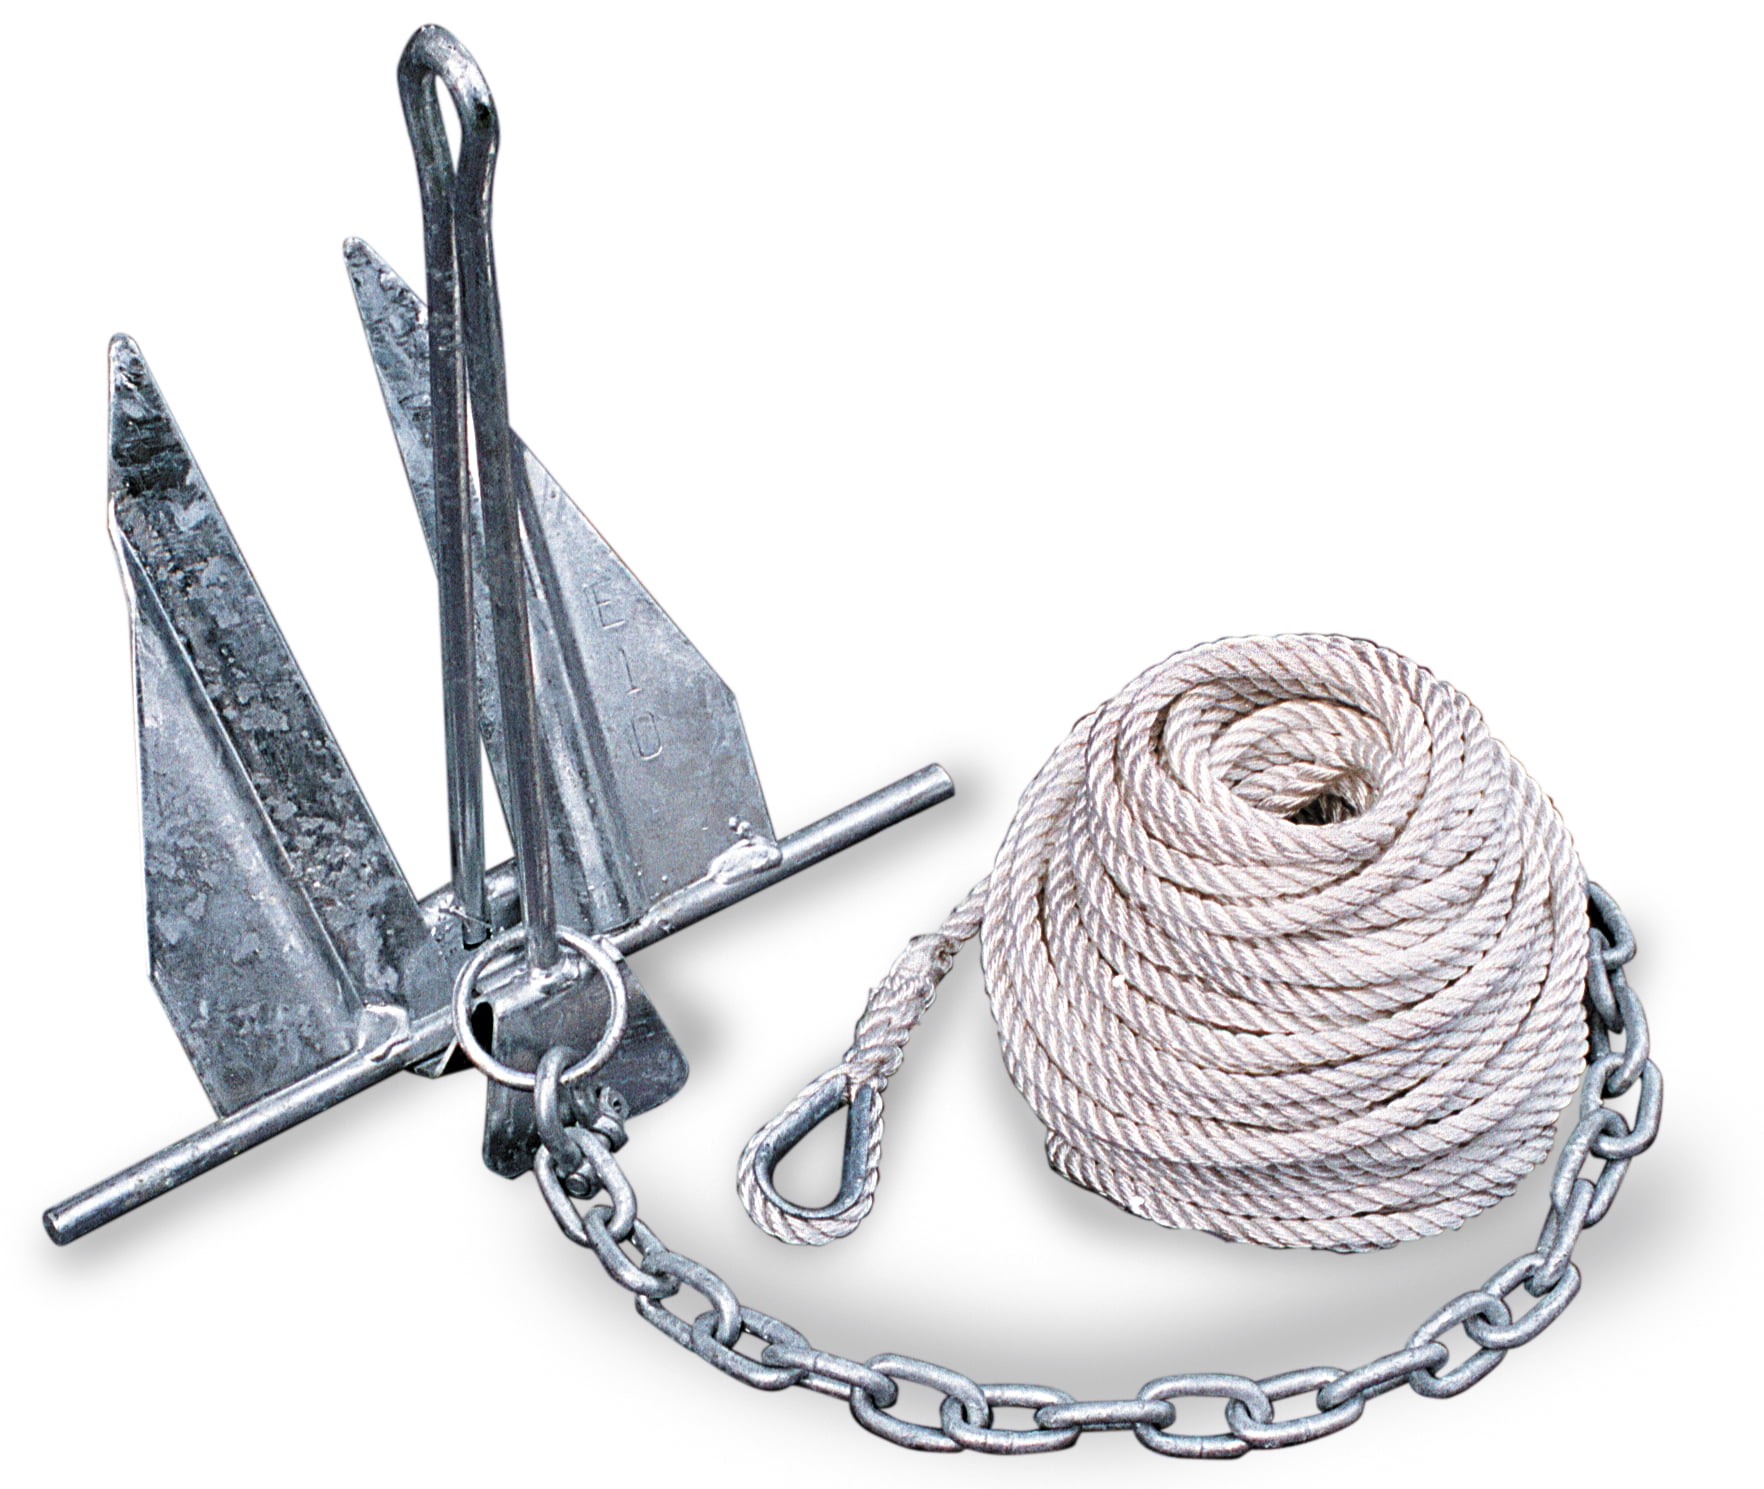 Small Boat Anchor Kit 20 Metres 10mm 3 Strand Nylon into Hard Eye and 1 Metre 8mm Chain 